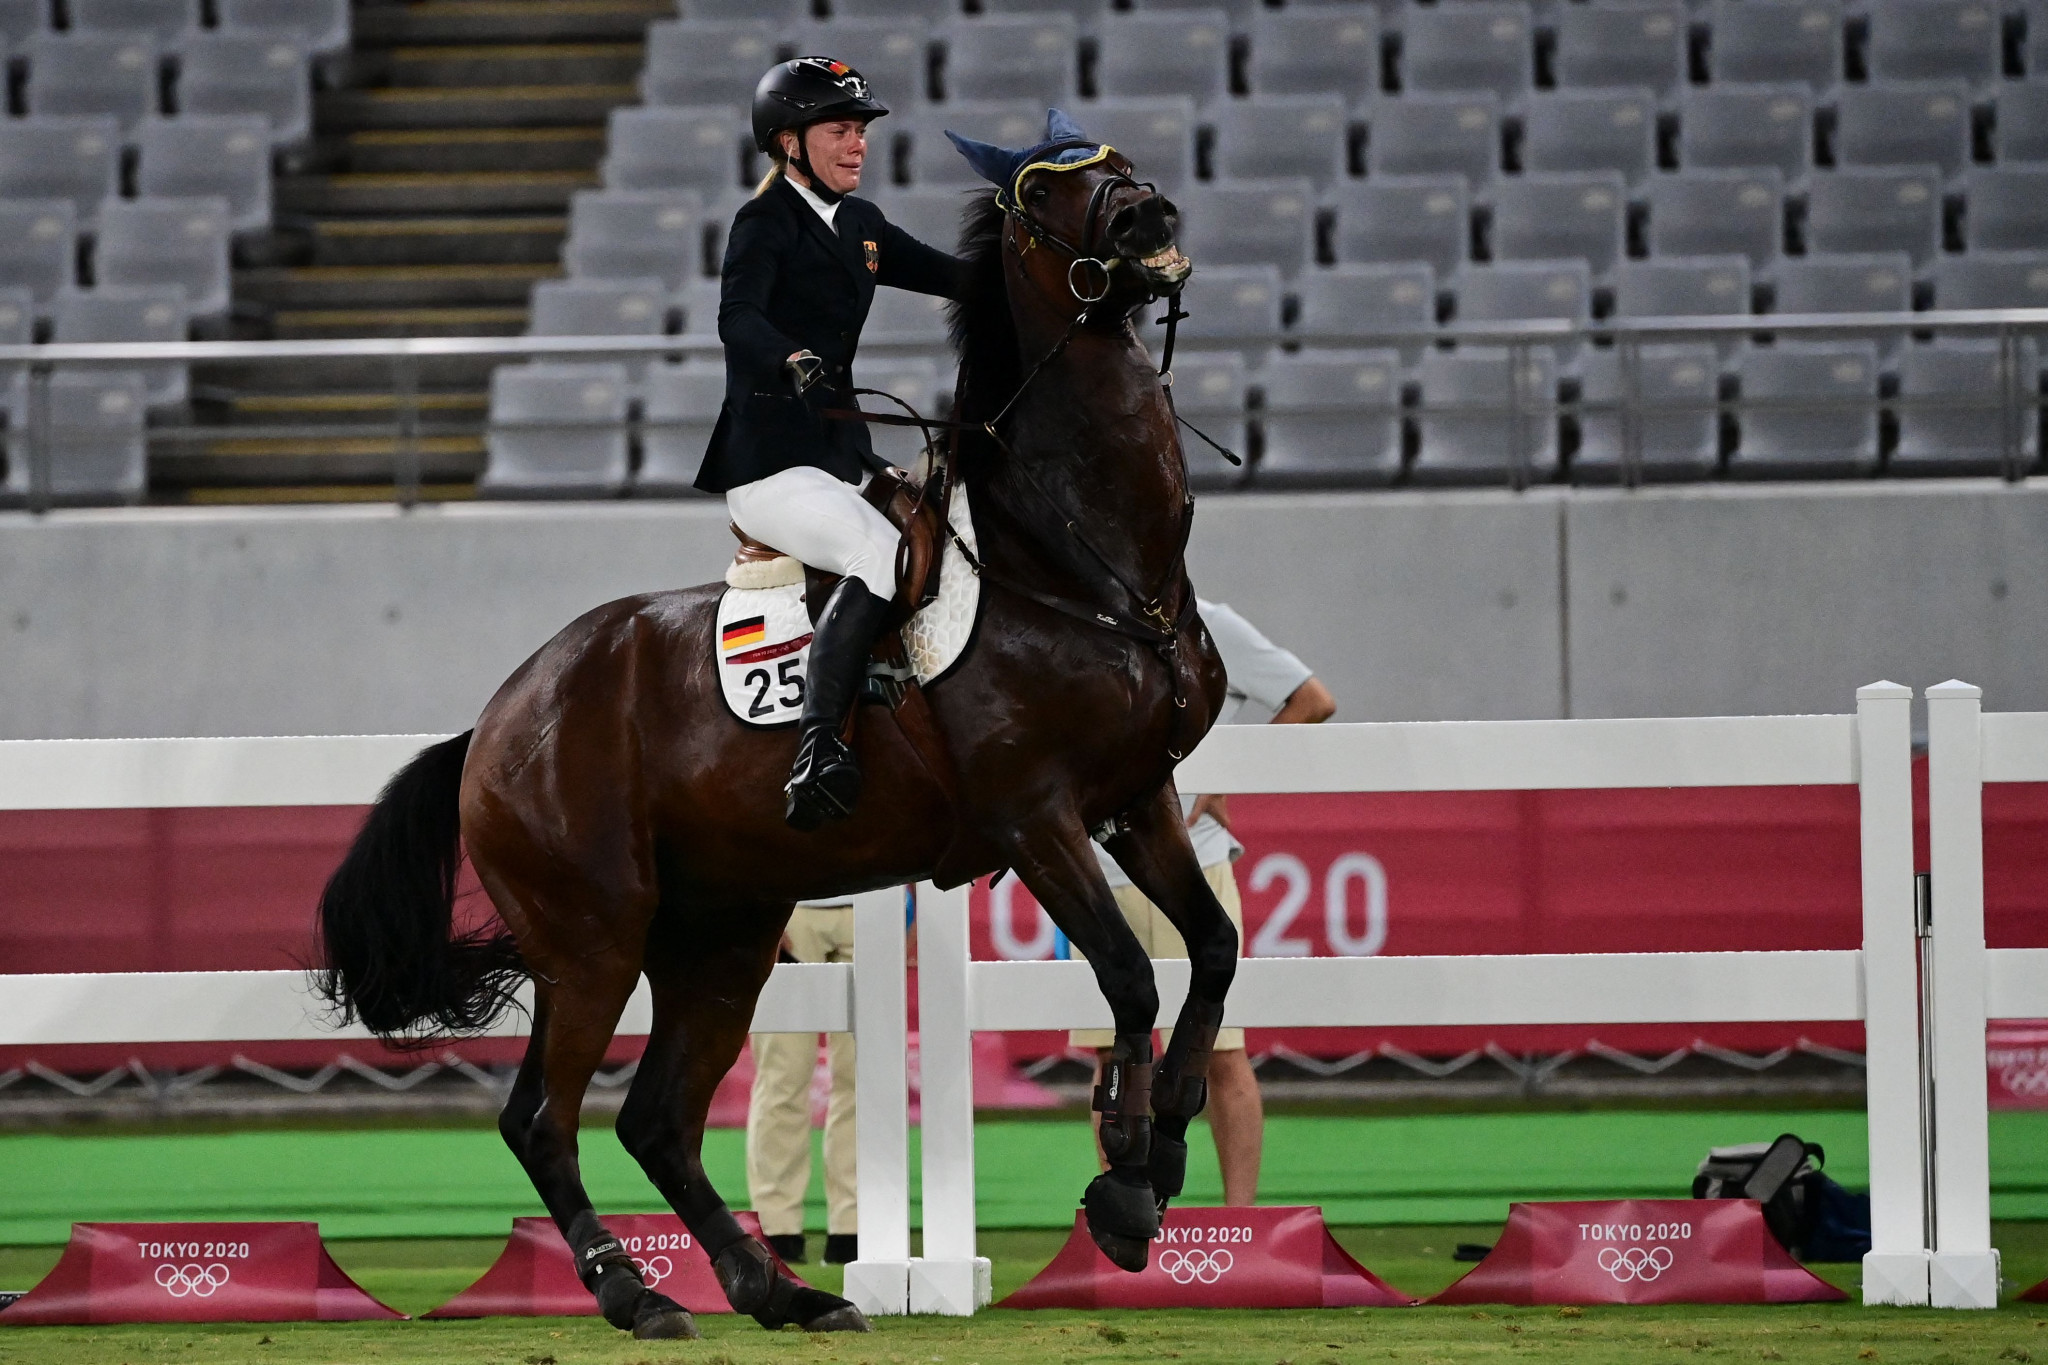 Riding is set to be dropped by the UIPM after Paris 2024, following the controversy involving the horse Saint Boy at Tokyo 2020 ©Getty Images